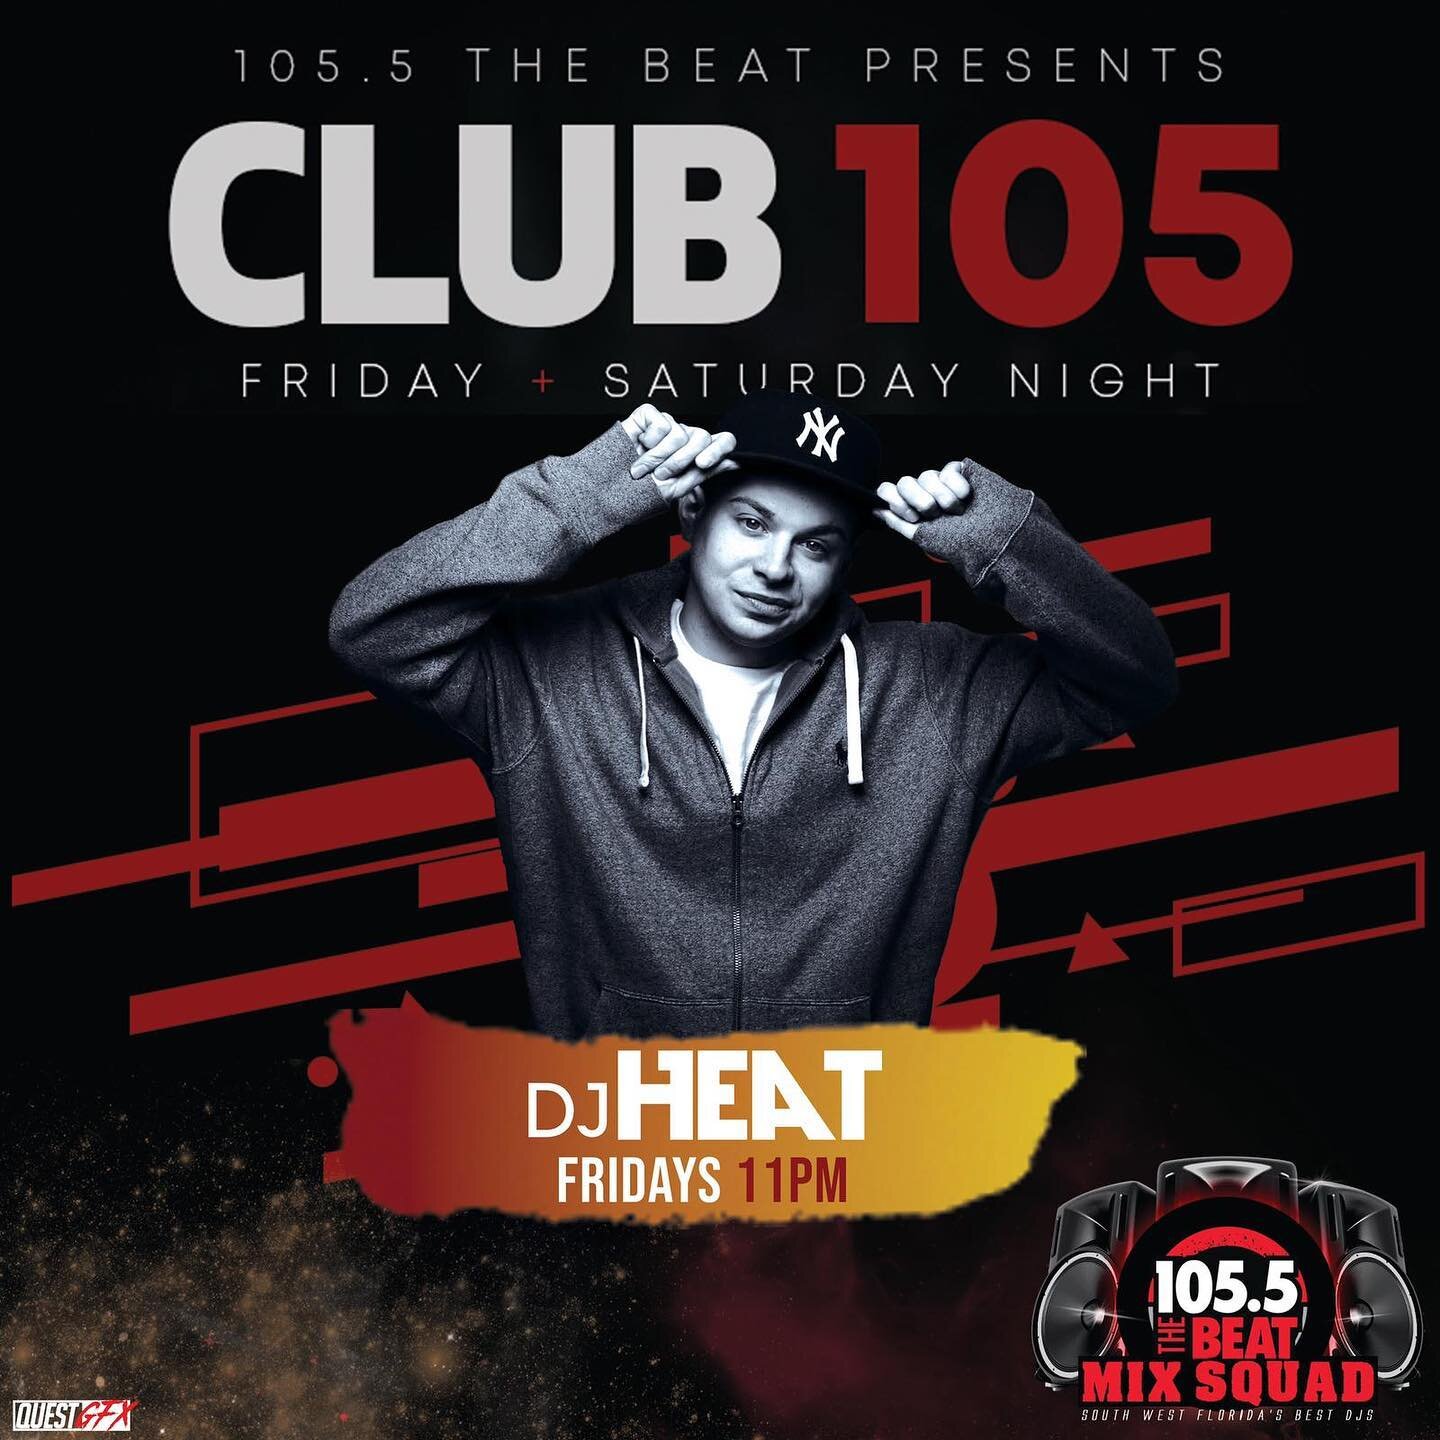 #FtMyers Its up 🚀🚀🚀 Catch me rocking on @1055thebeat tonight at 11pm EST 🔥🔥🔥 Listen worldwide on that @iheartradio app 🌍🌏🌎 Big shouts to the whole squad 💥💥💥@shortguyshow @djqueststupid what up! #IHeartMafia #BlackBottleBoys #FixYourFace #